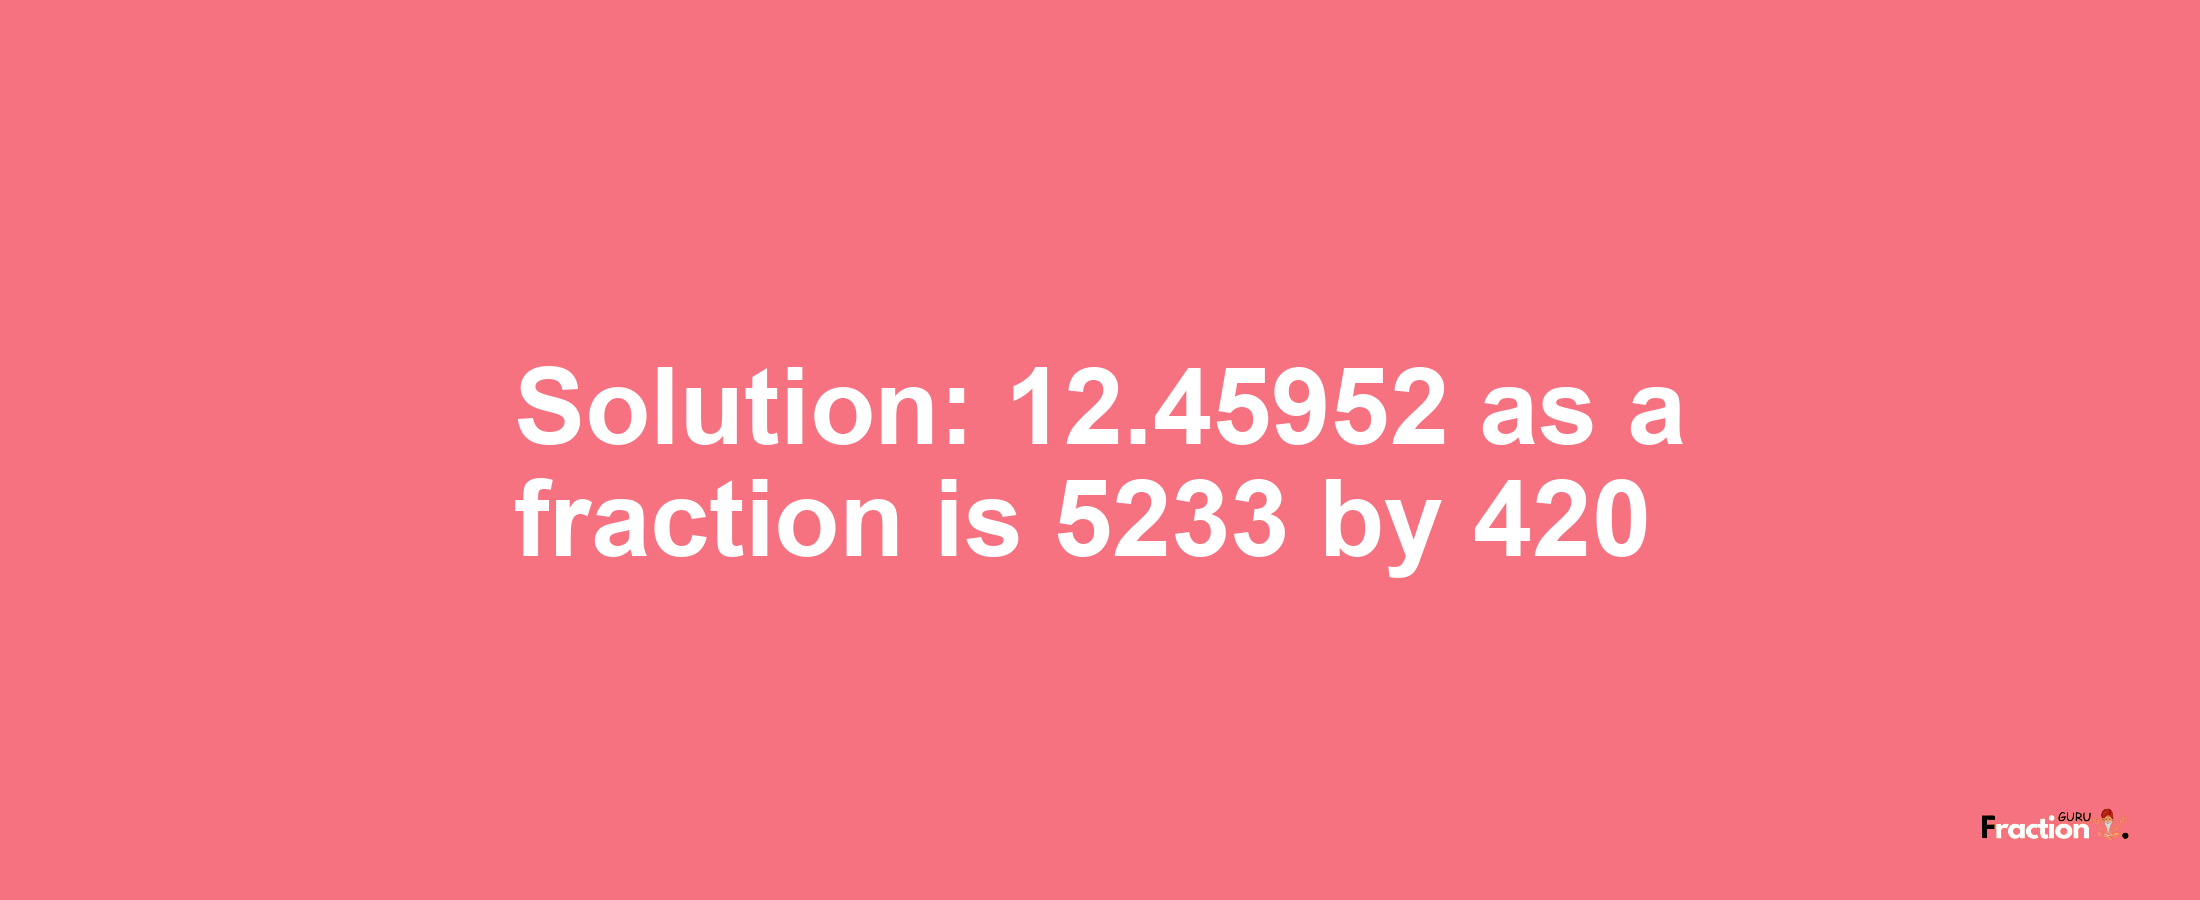 Solution:12.45952 as a fraction is 5233/420